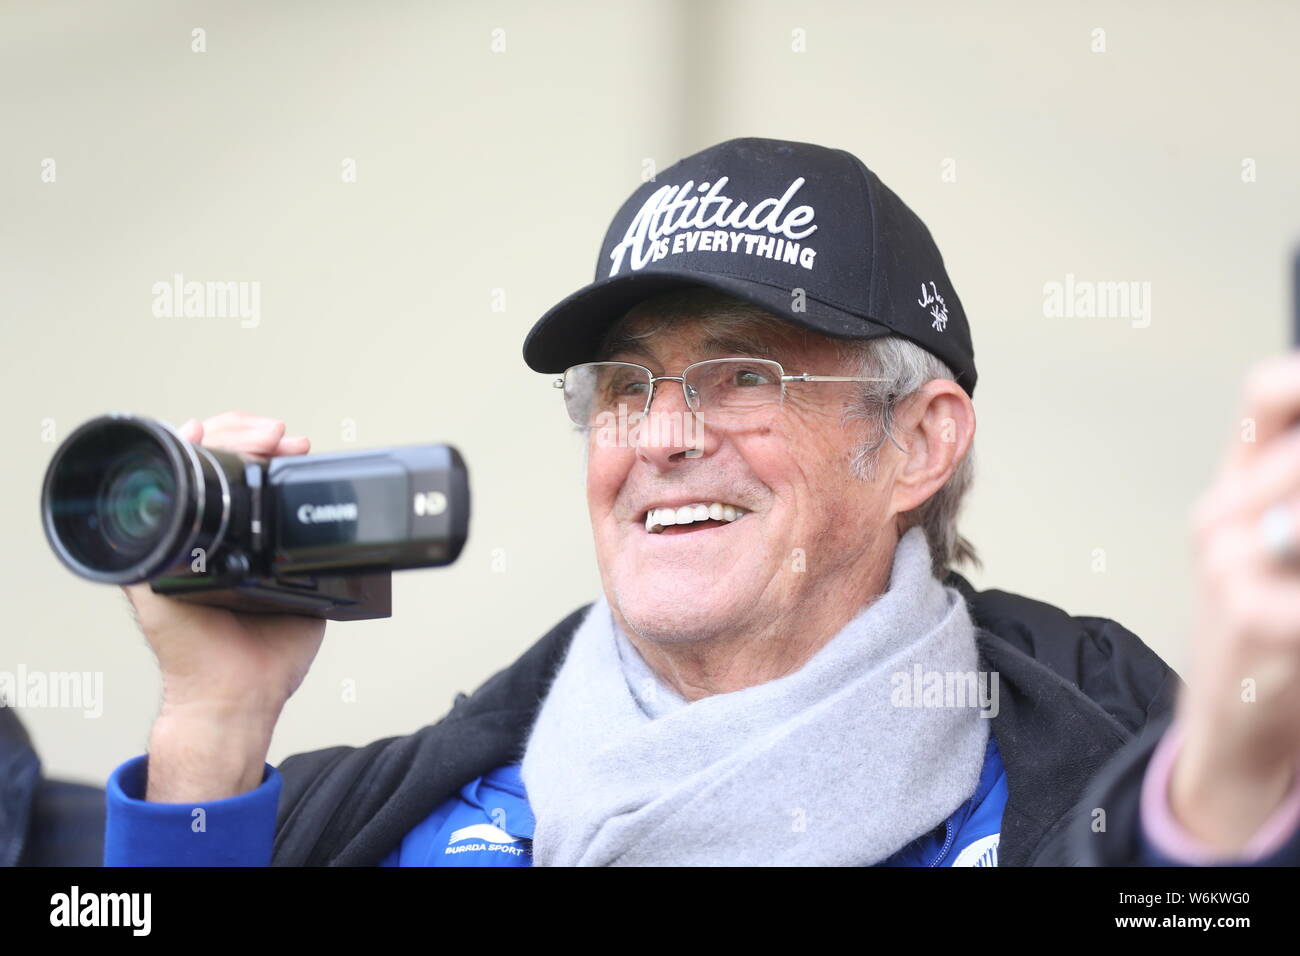 Serbian football coach and former player Bora Milutinovic attends a press conference of Sina 5v5 Football Golden League Finals in Chengdu city, southw Stock Photo